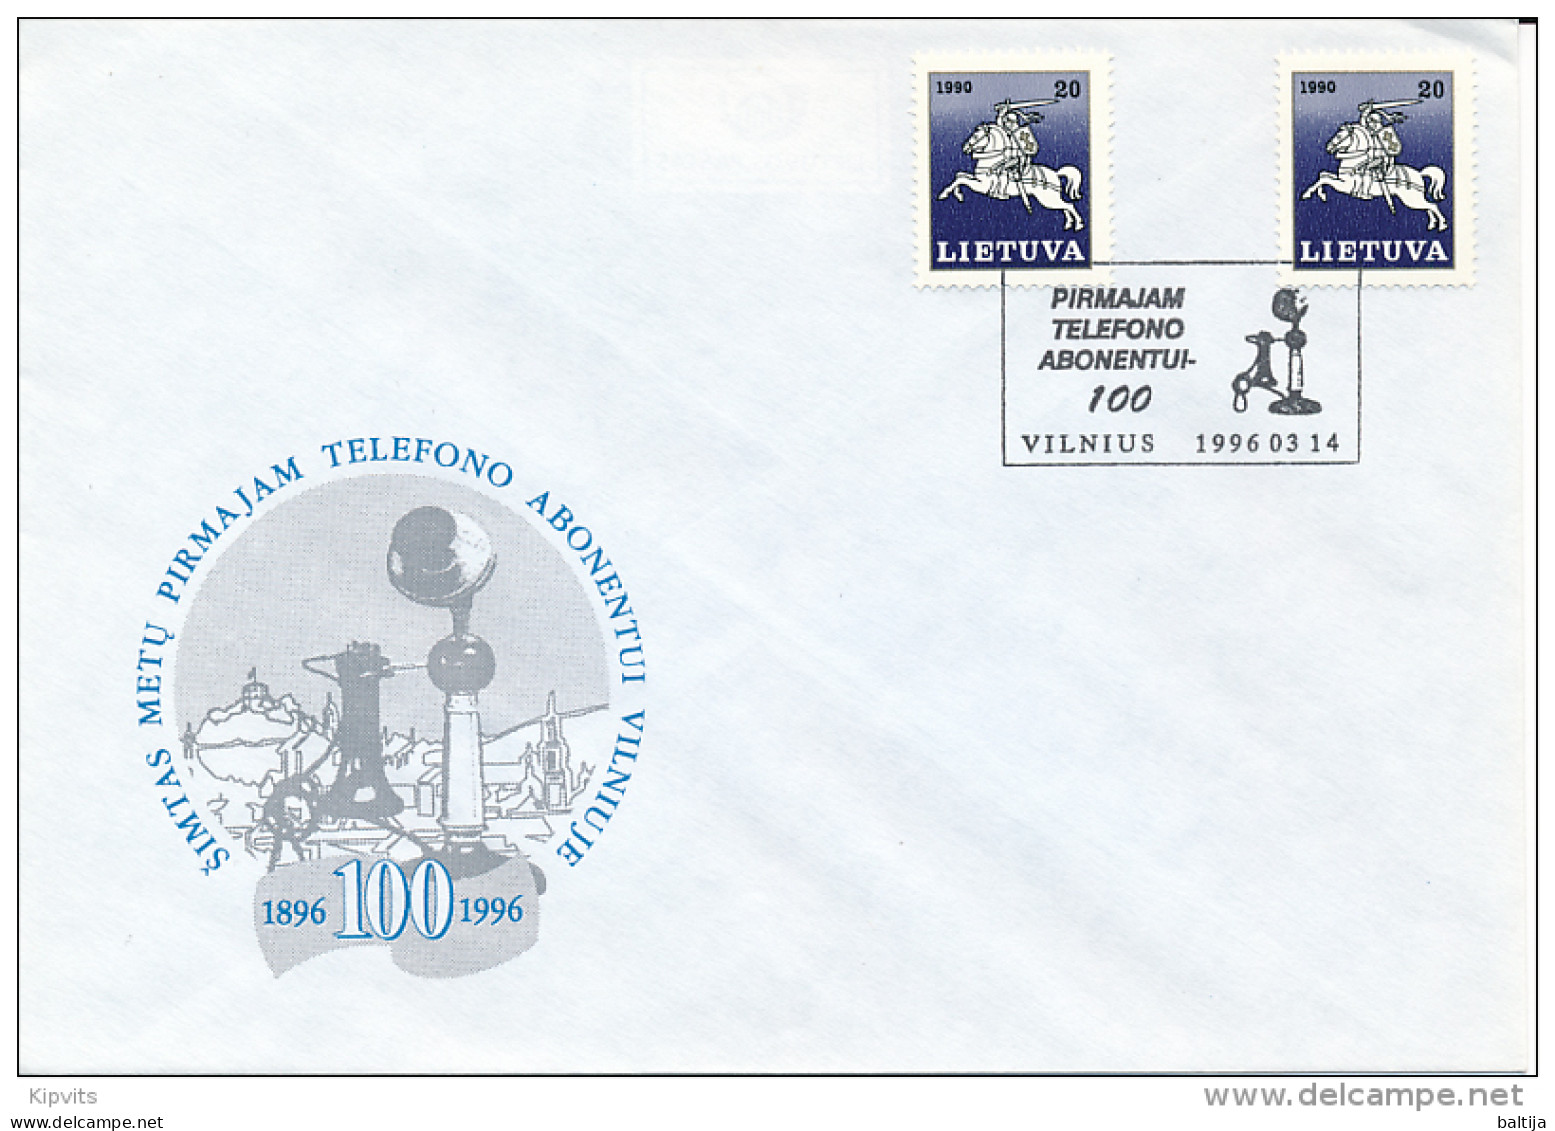 Special Cancellation Cover / Cachet, 1st Telephone Line 100th Anniversary - 14 March 1996 Vilnius - Lituania